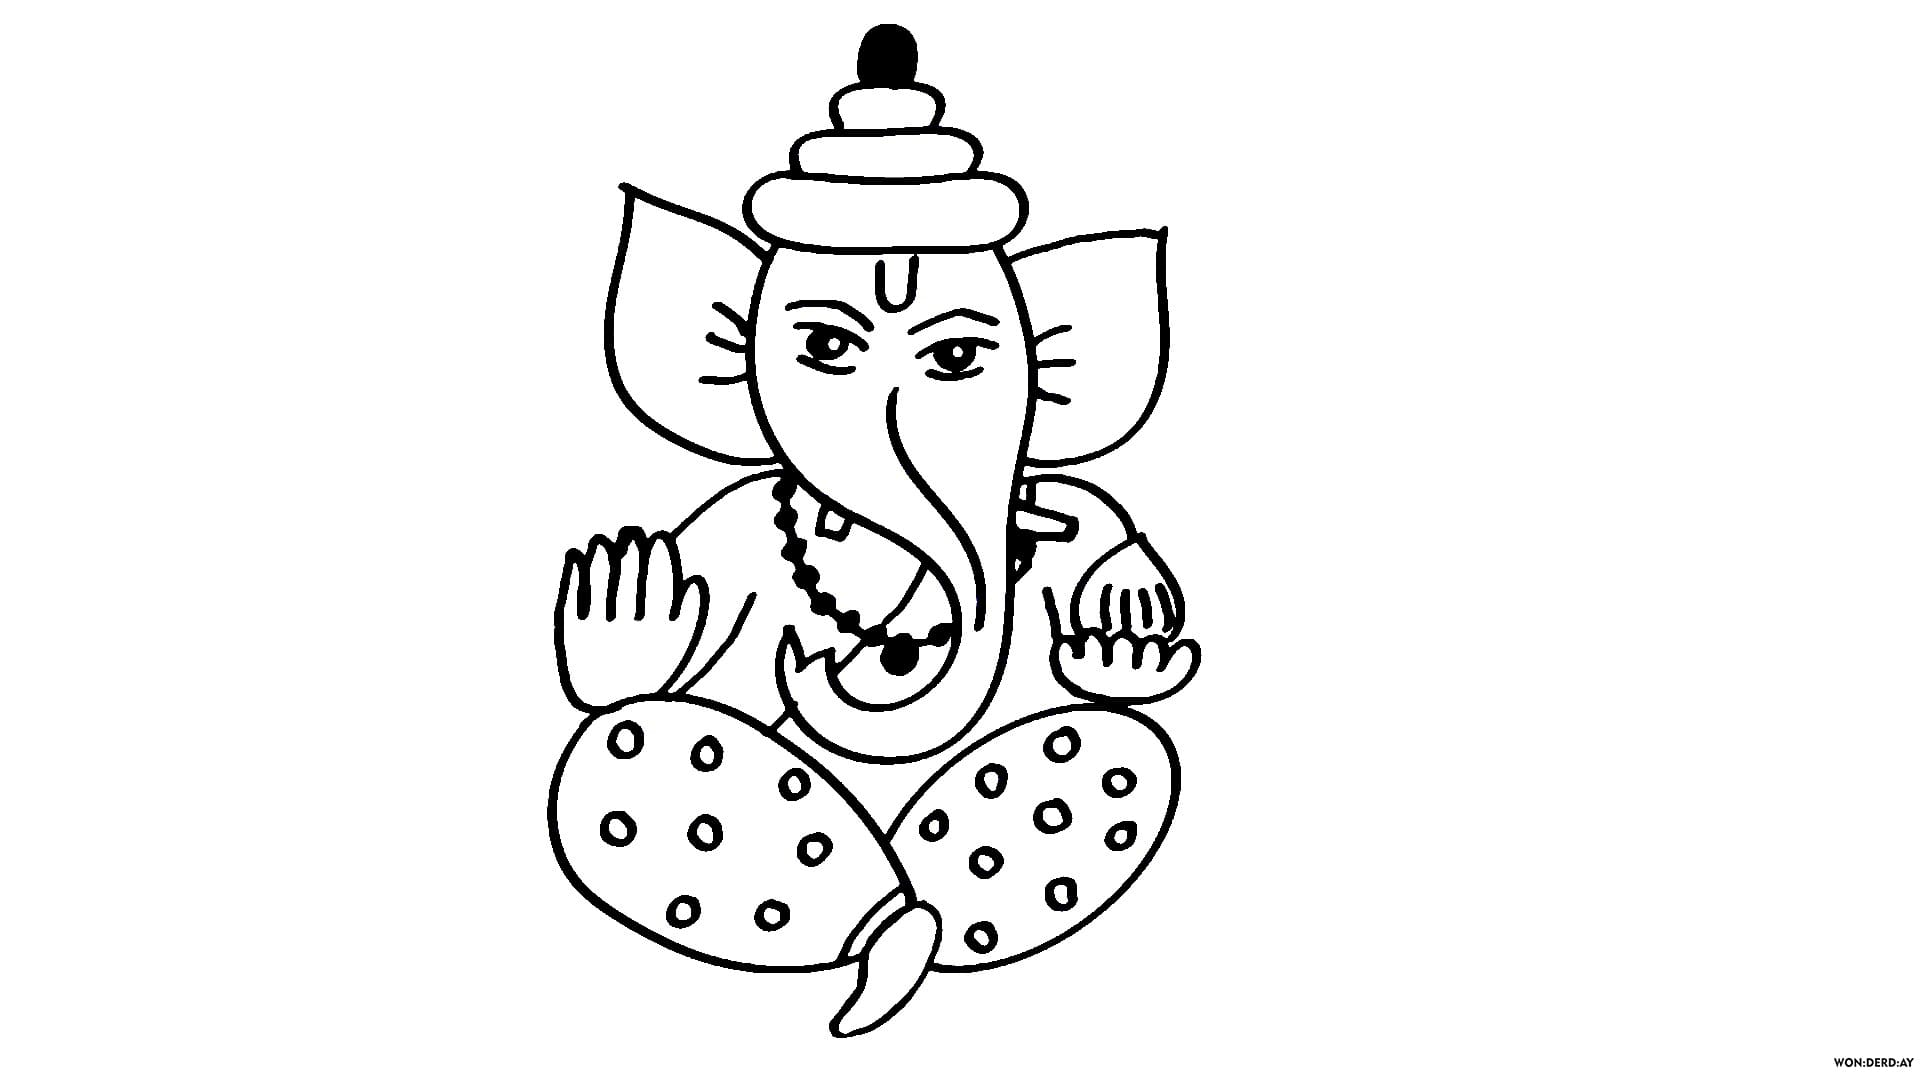 How to Draw Ganesha. 20 Pencil Drawing Lessons WONDER DAY — Coloring